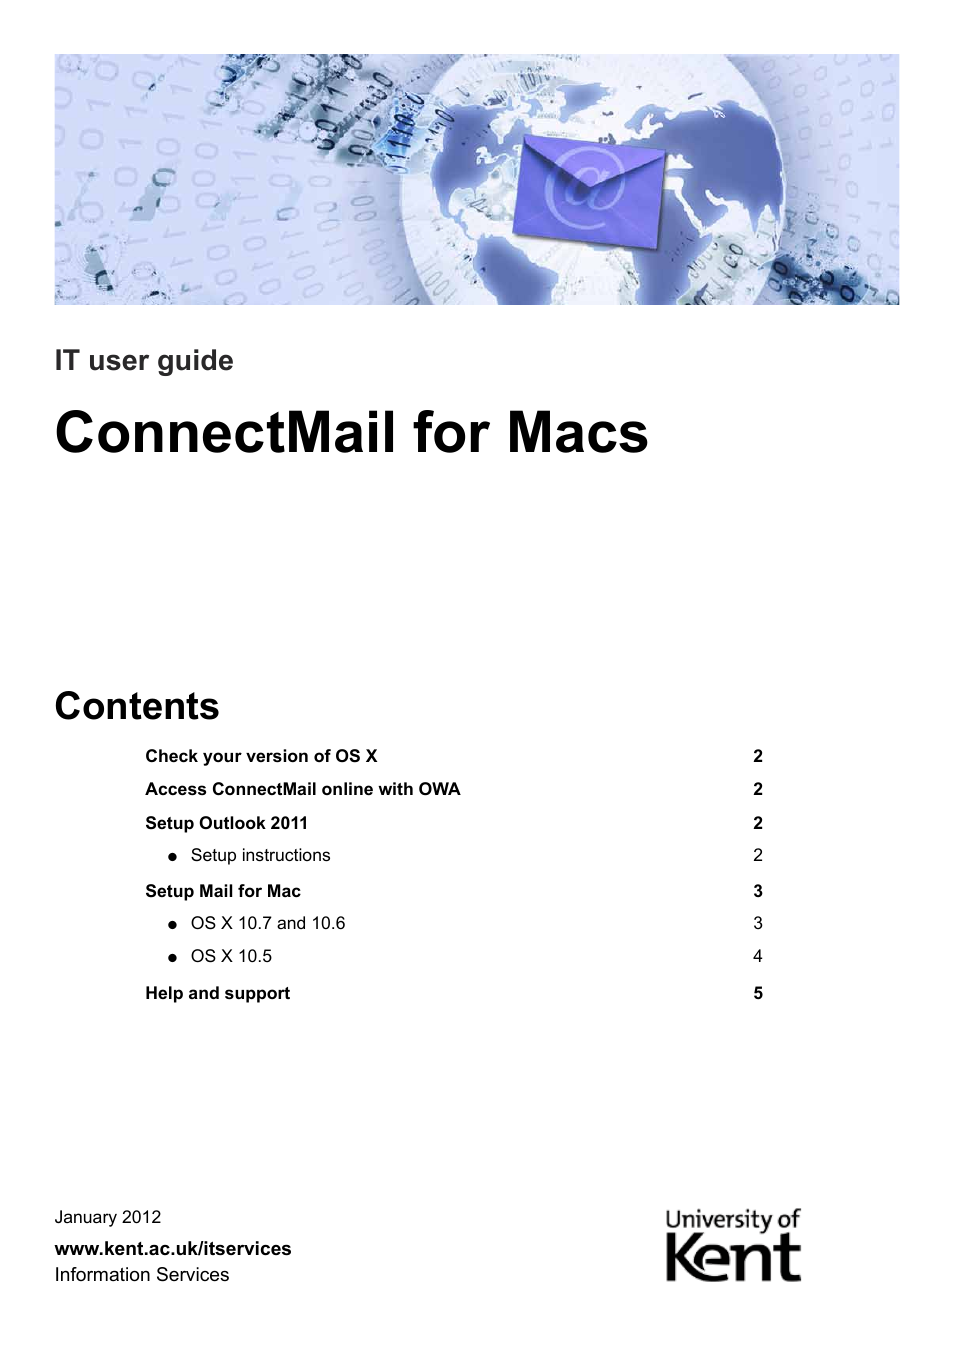 ConnectMail for Macs (IT user guide)